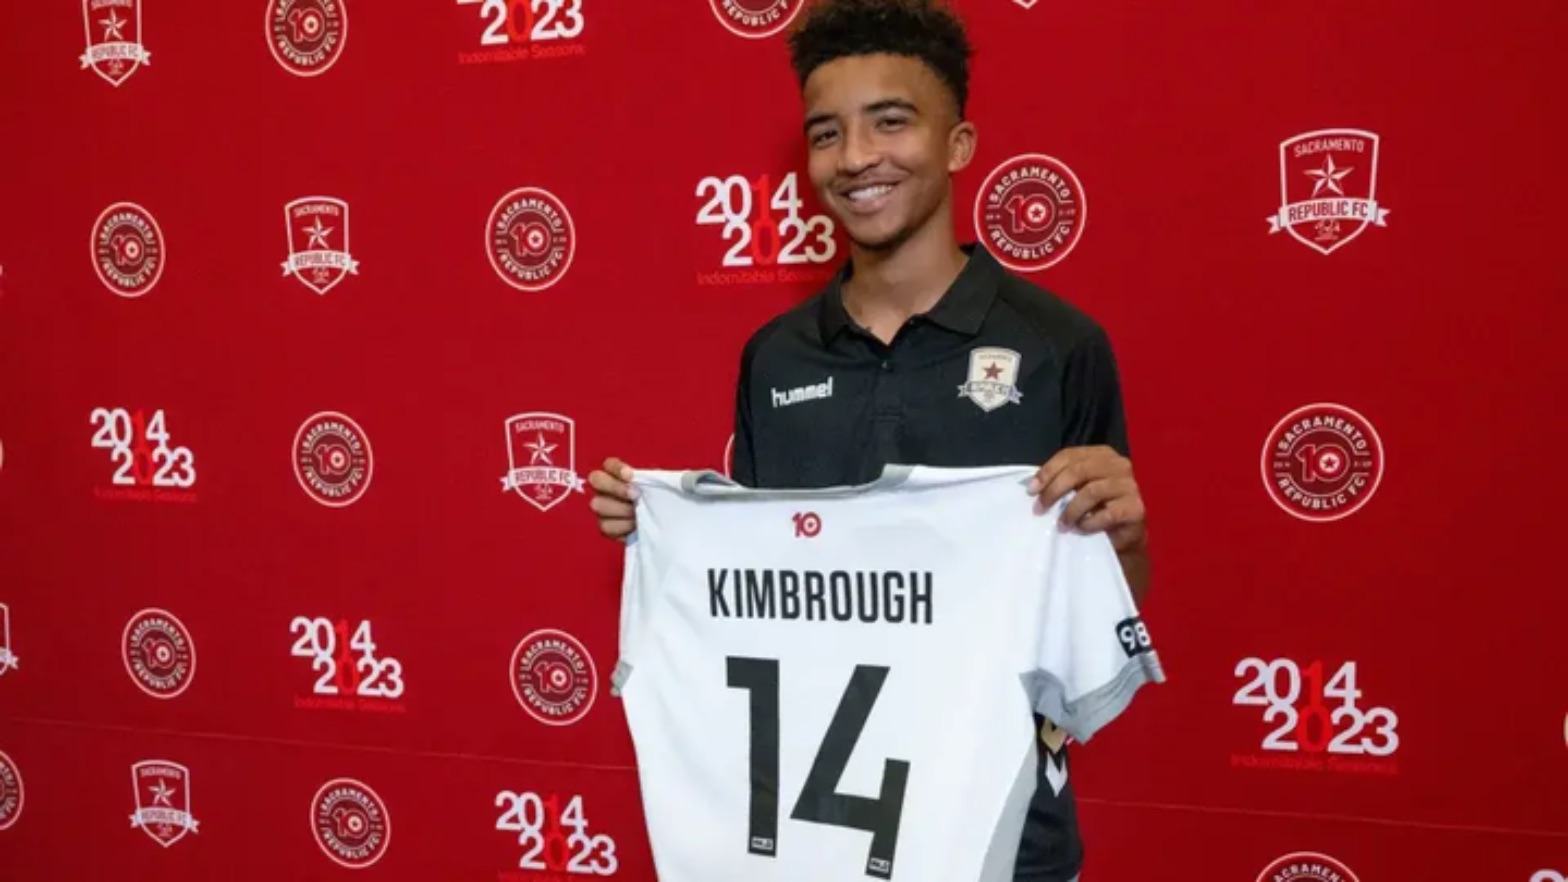 13-Year-Old Da’vian Kimbrough Inks Contract With Republic FC, Becomes Youngest Pro In U.S. Team Sports